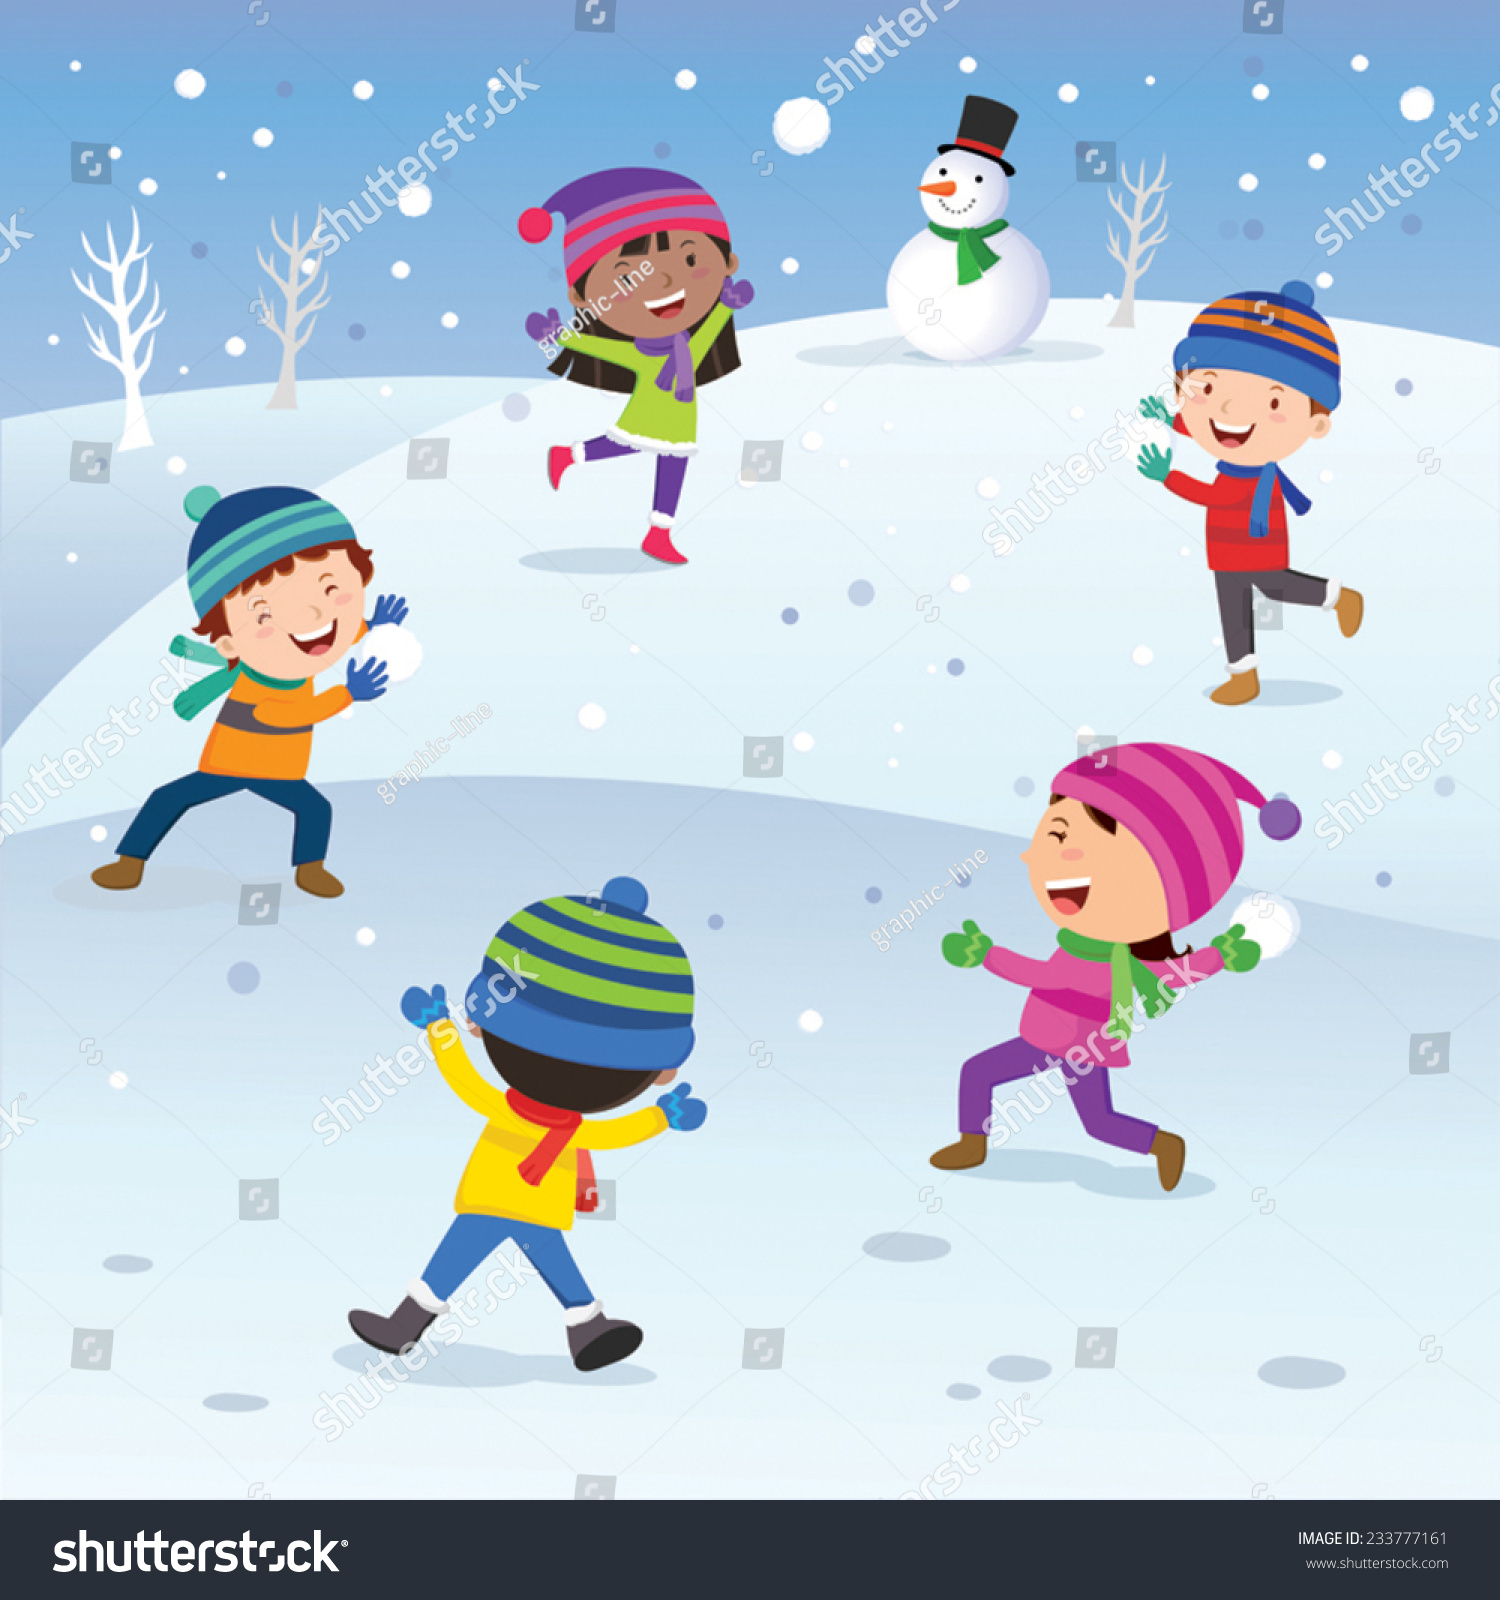 winter games clipart - photo #44